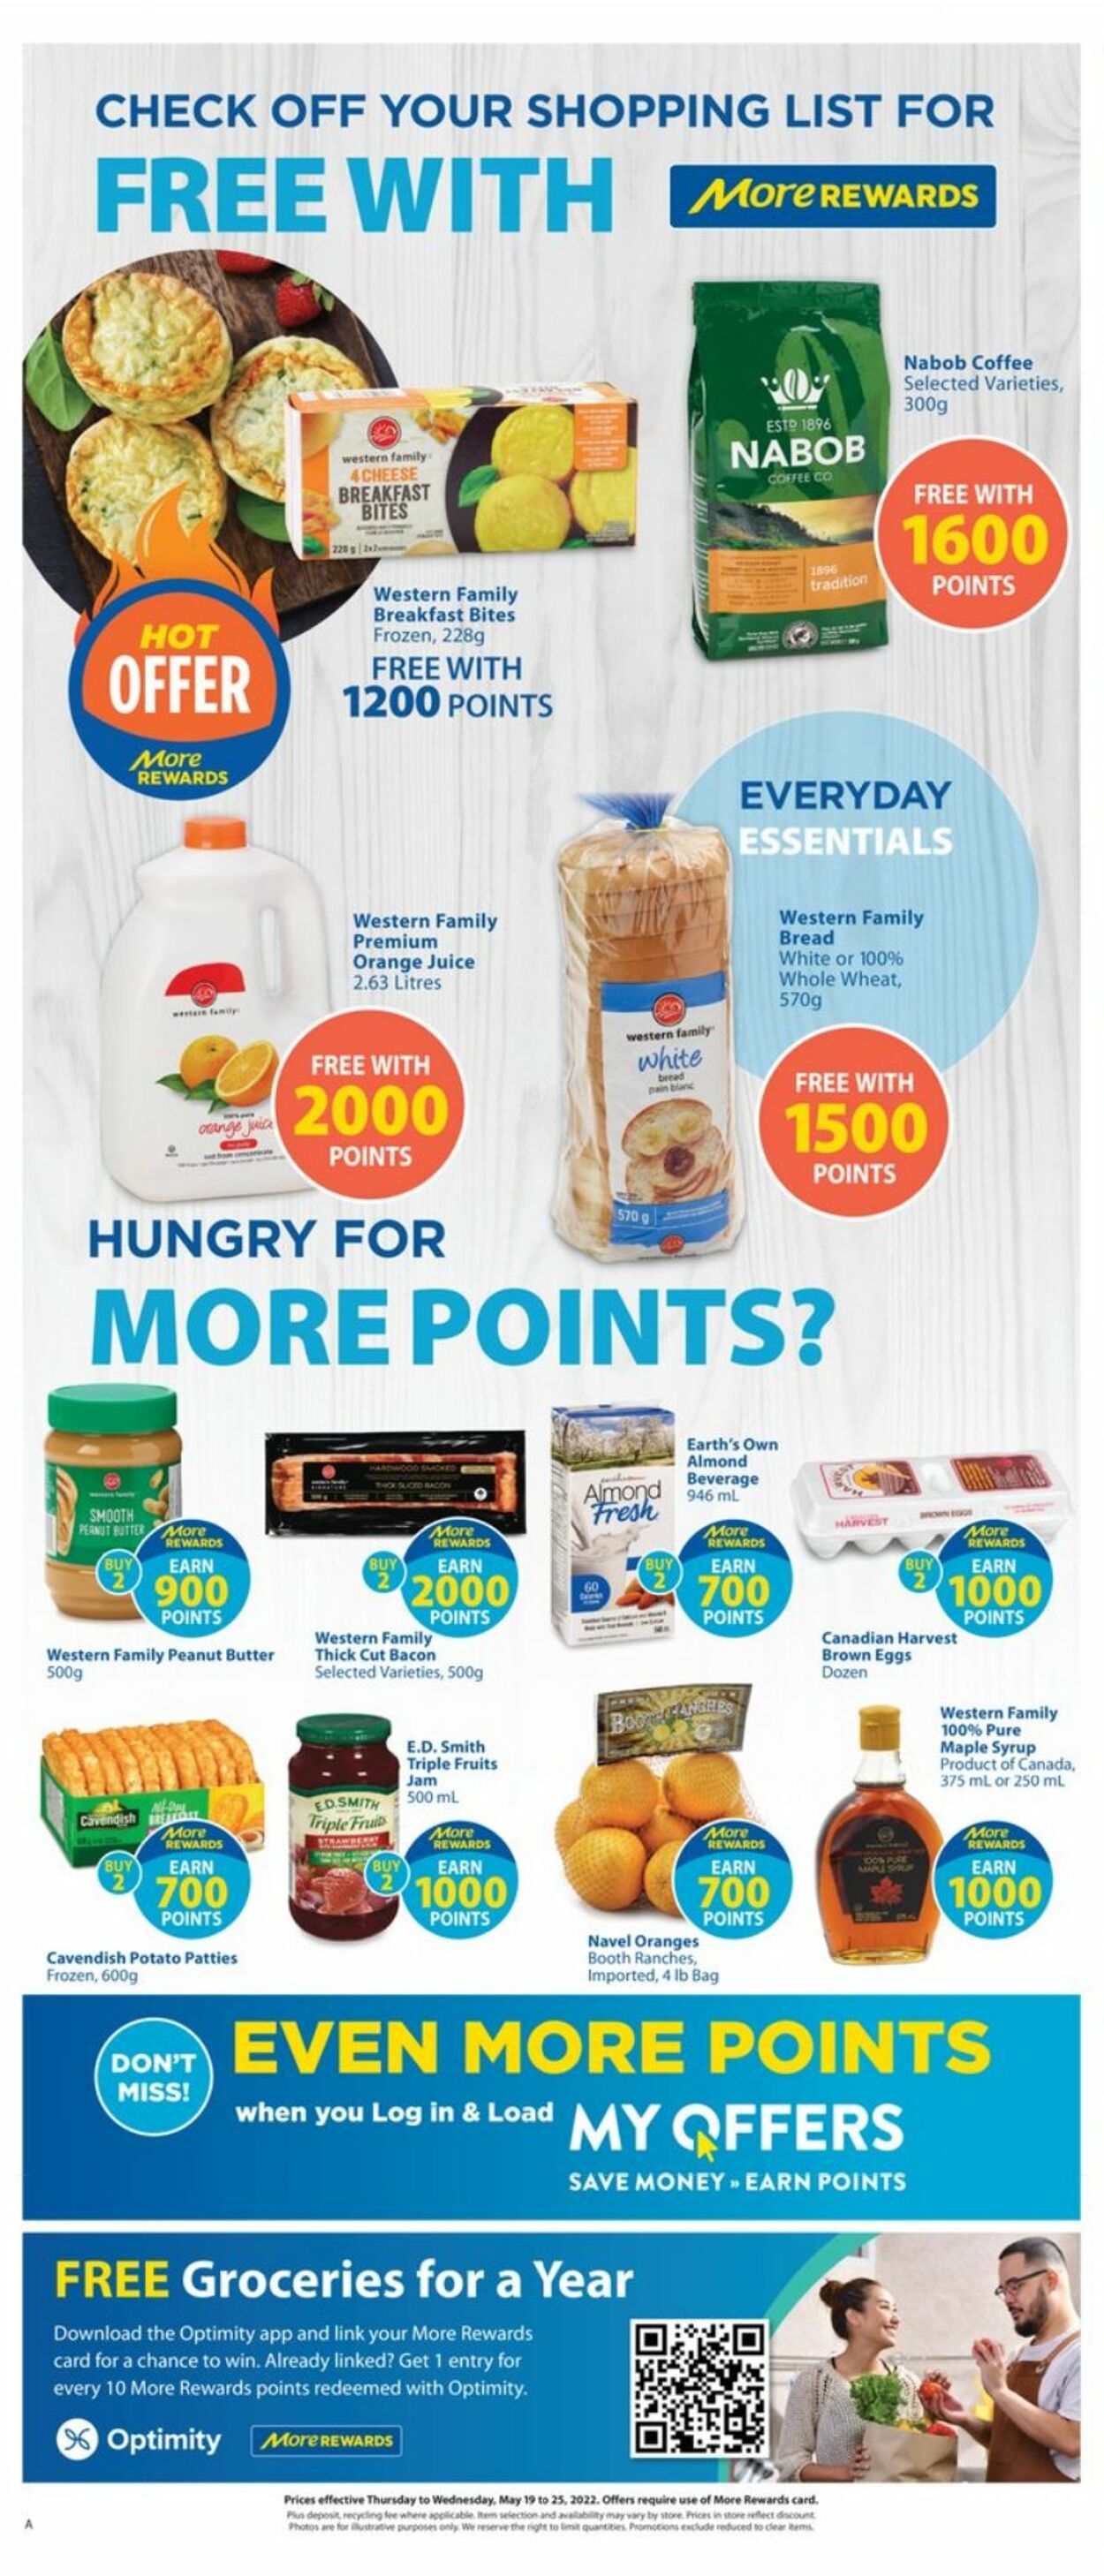 Flyer Save-On-Foods 19.05.2022 - 25.05.2022